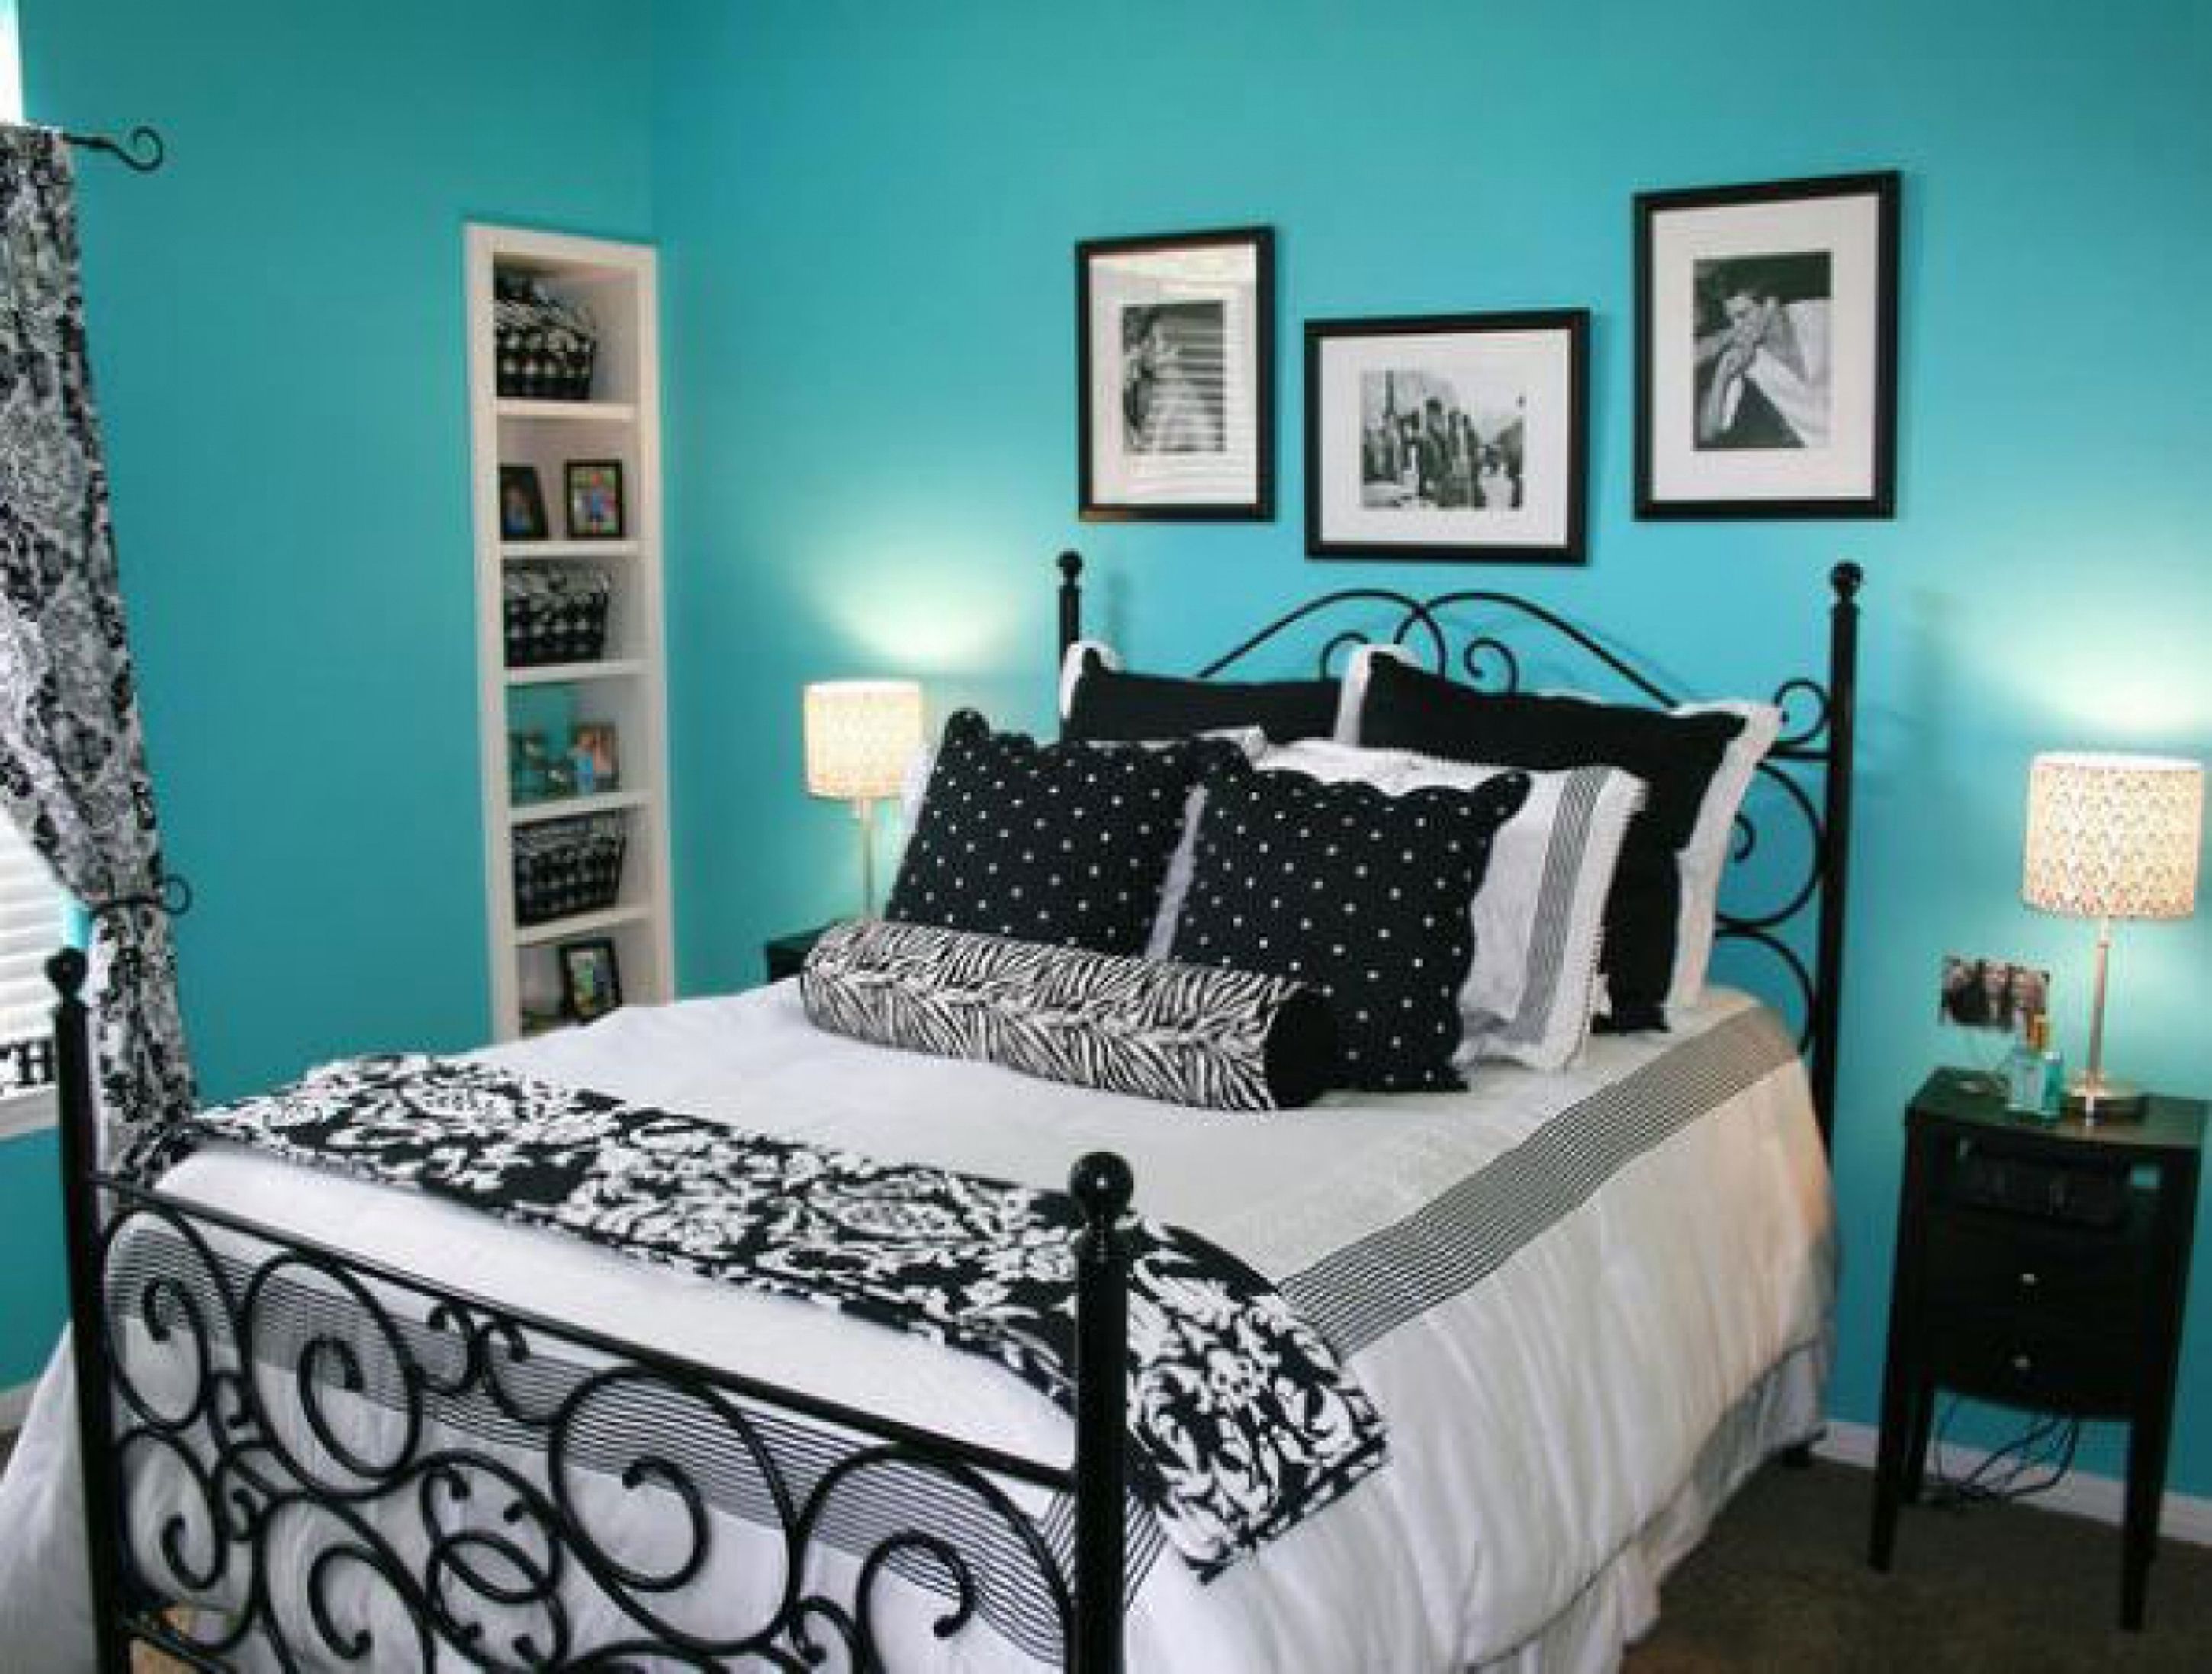 Romantic Blue Colour Bedroom Idea With Light Blue Wall White Bed With Black Pillows And White Desk Lamp Interesting Blue Colour Bedroom Ideas (View 12 of 39)